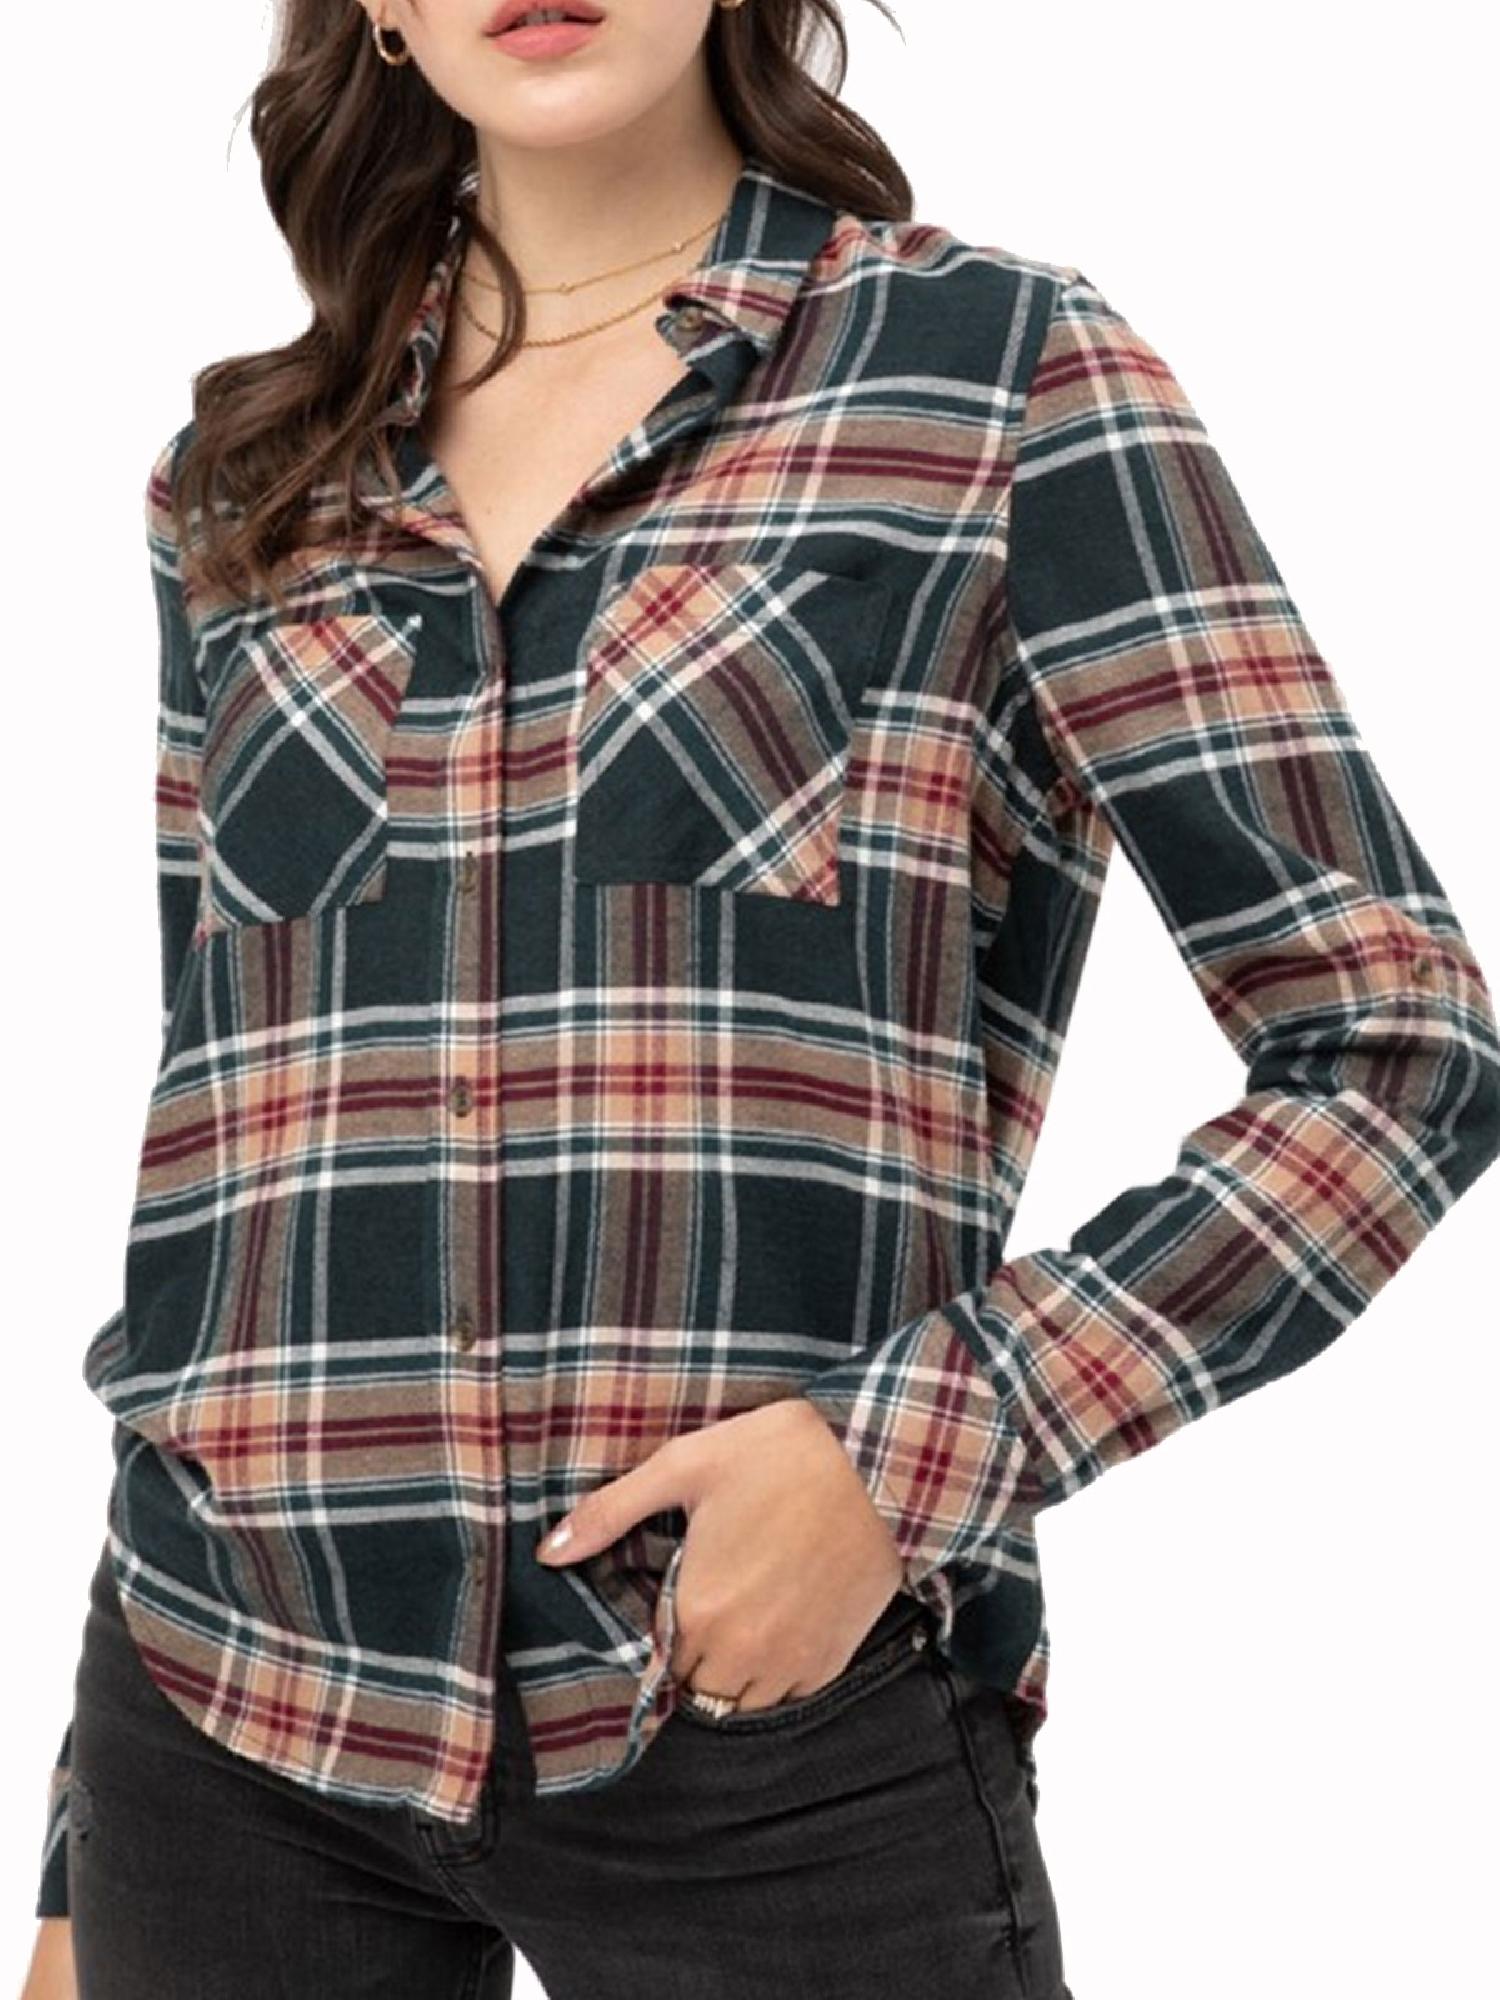 Design by Olivia Women/'s Roll Up Long Sleeved Button Down Collared Plaid Shirt